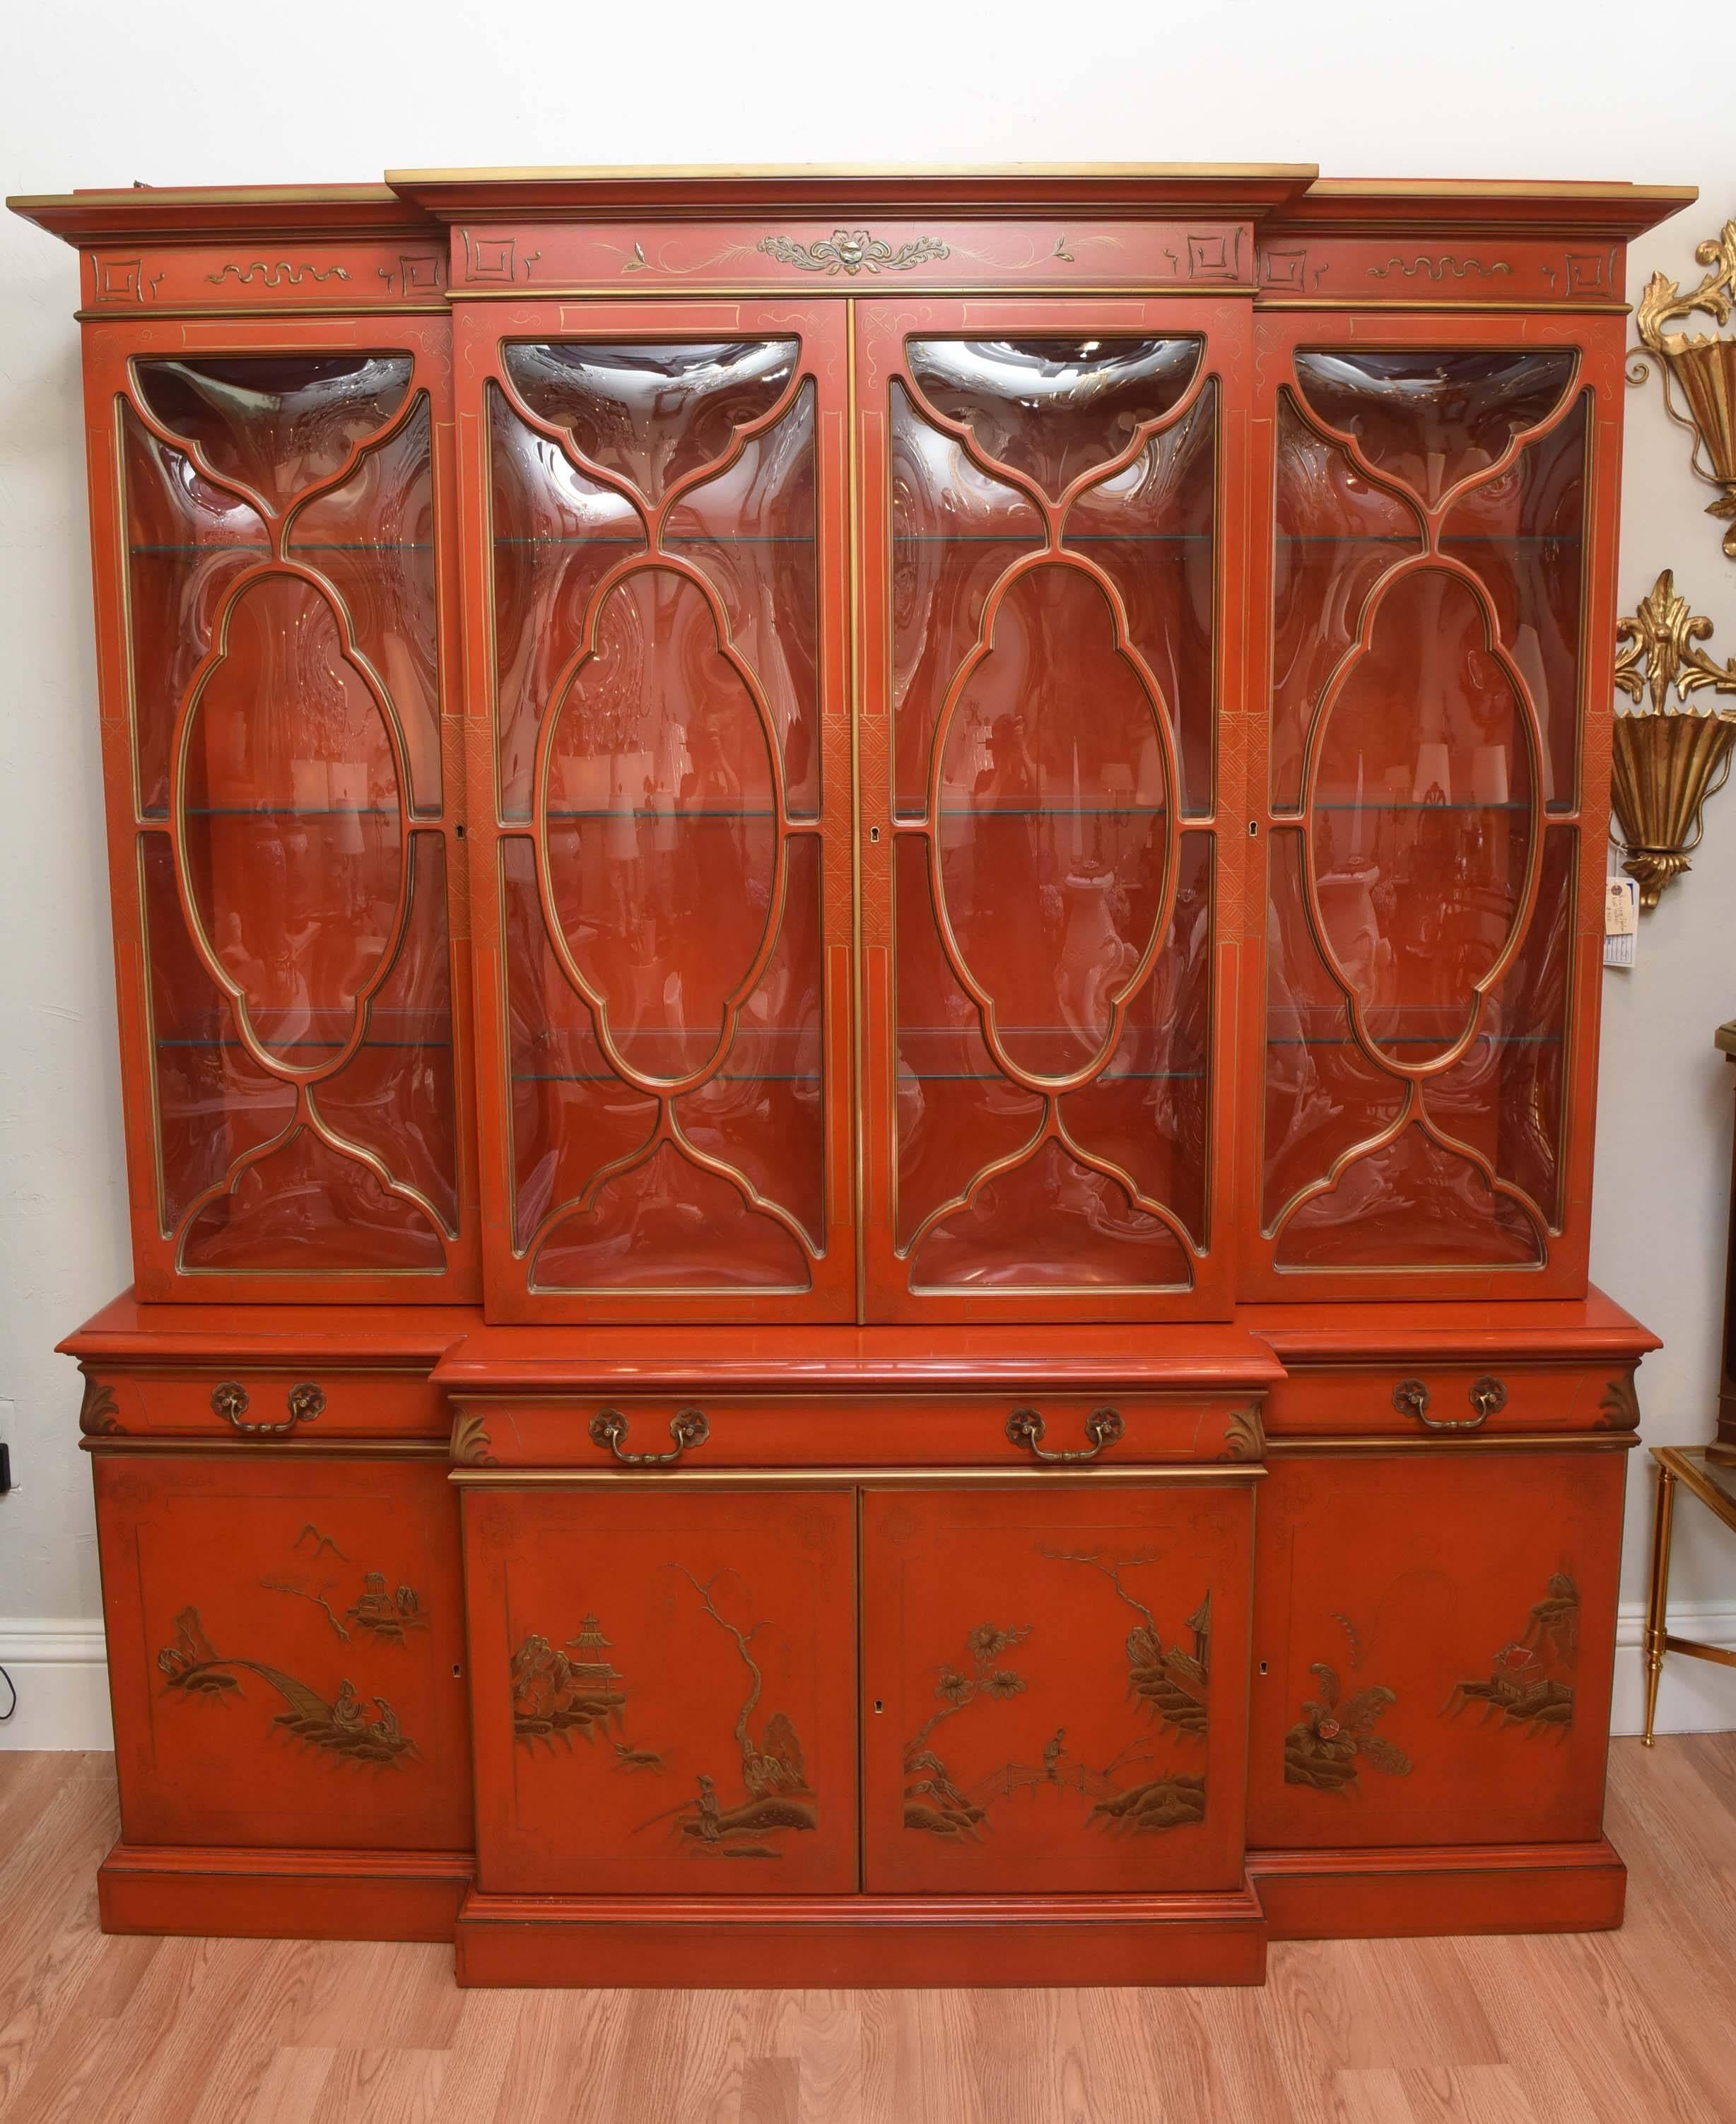 Stunning and impressive chinoiserie style breakfront. Four handblown glass doors with fretwork over three drawers. The middle drawer opens to reveal a leather top writing surface. The bottom has four doors with ample storage space.